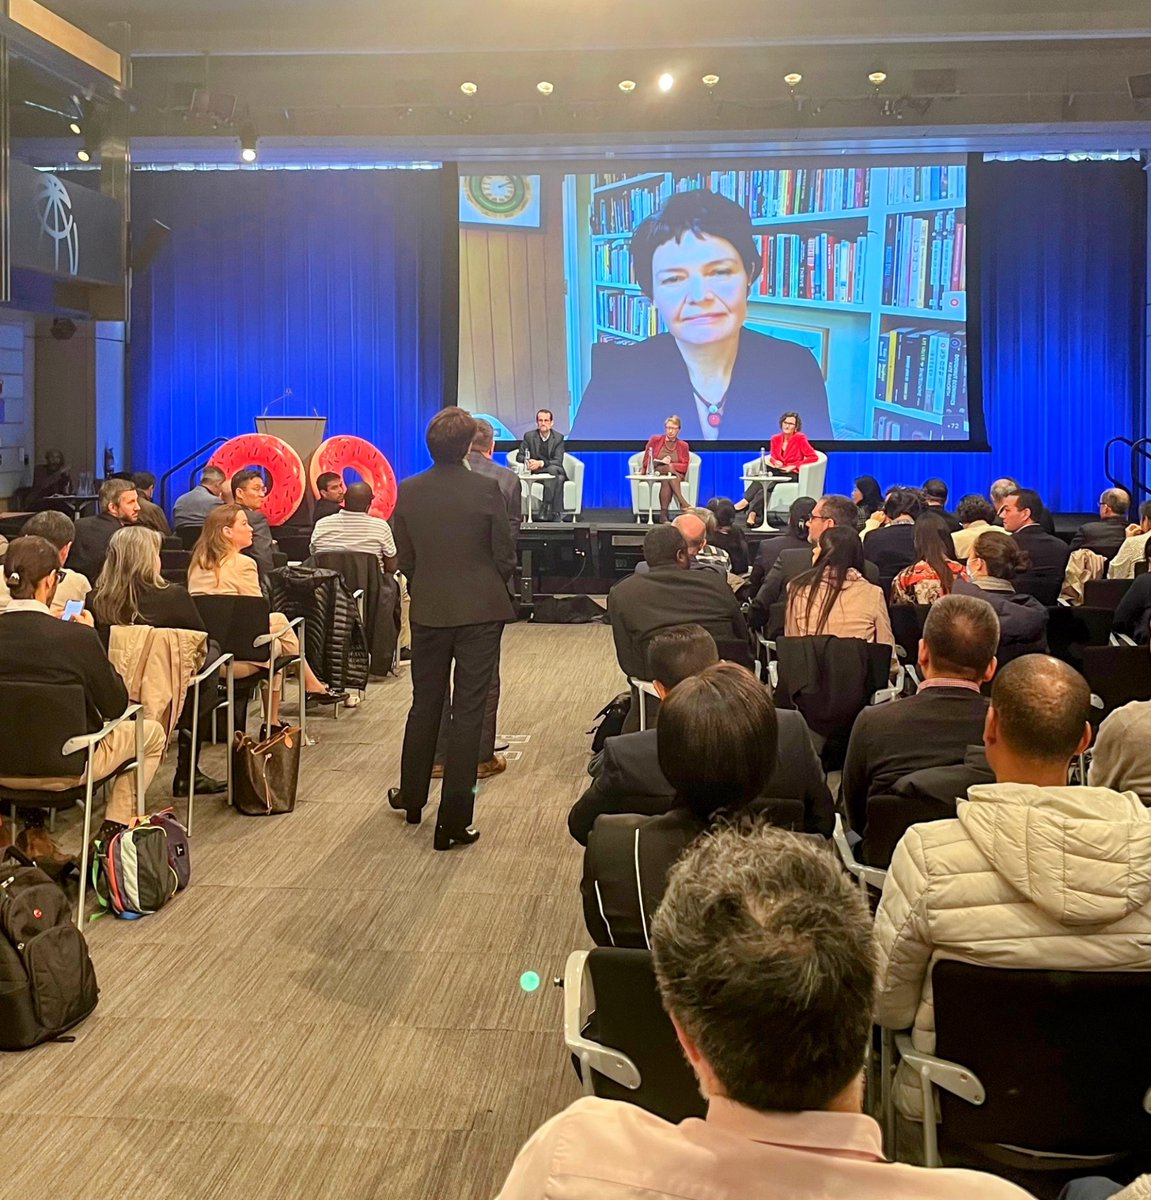 Thank you @KateRaworth for the inspiring talk today in front of 600 @WorldBank staff. It’ll be a long journey to create meaningful change but the spirit of trailblazers like you, Herman Daly, and many others gives guidance and hope. #ecologicaleconomics